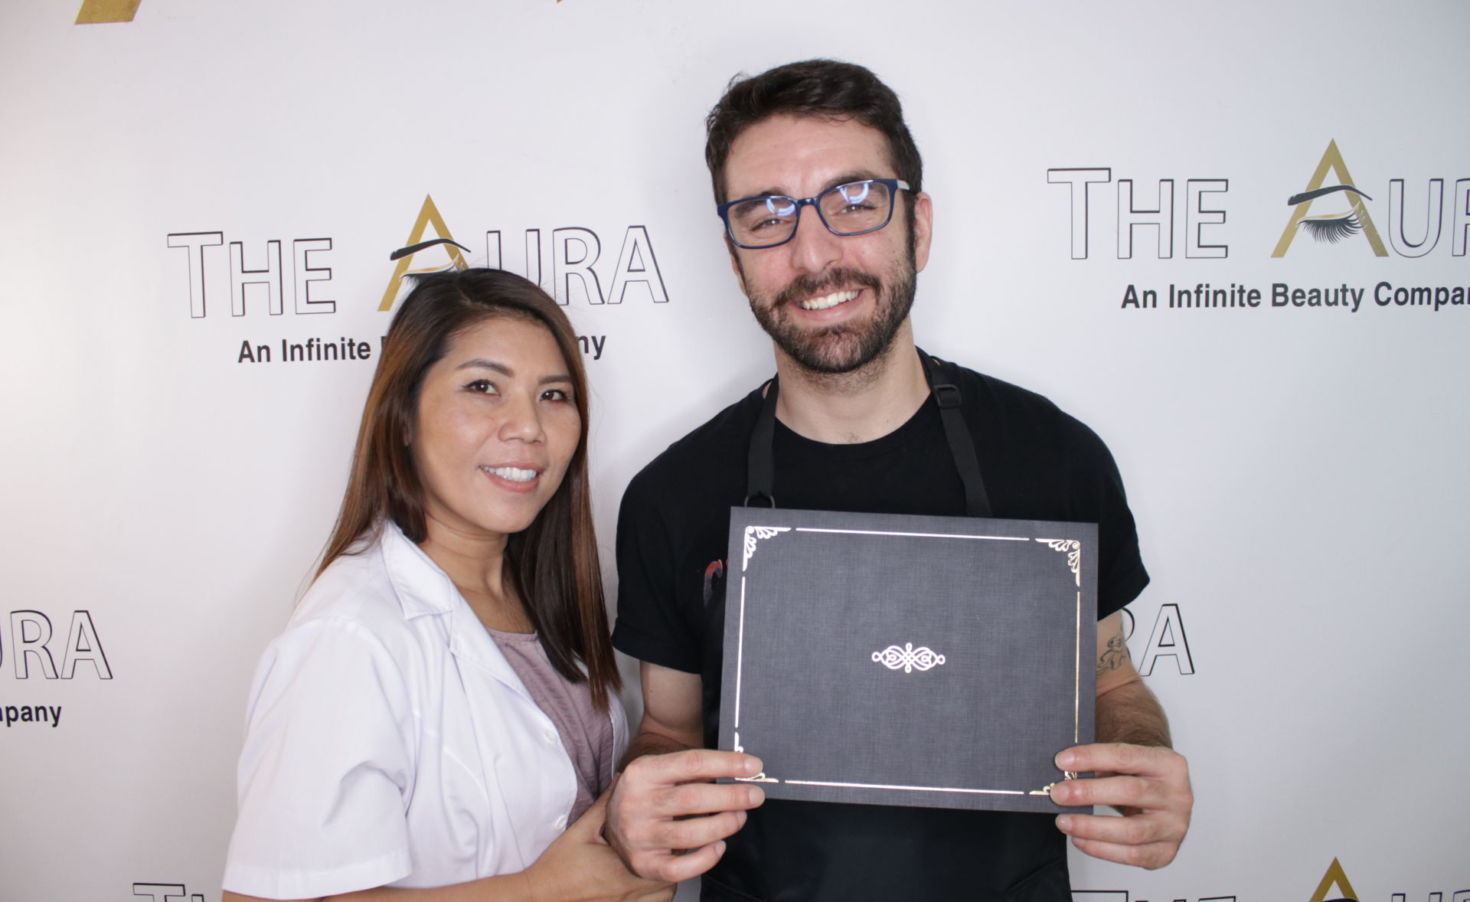 THE AURA BEAUTY ACADEMY is a beauty company that provides microblading, permanent cosmetic make-up, and provides licensing approved training academy in Westminster - Orange County California. 🏢 Address: 14550 MAGNOLIA ST, SUITE 206, WESTMINSTER, CA 92683 ☎ Hotline: (714) 989-6268 / 833-THEAURA (833-843-2872) 📧Email: theaura@beautylicensing.com 🌐Instagram: @aurabeautycompany 🌐Website: beautylicensing.com